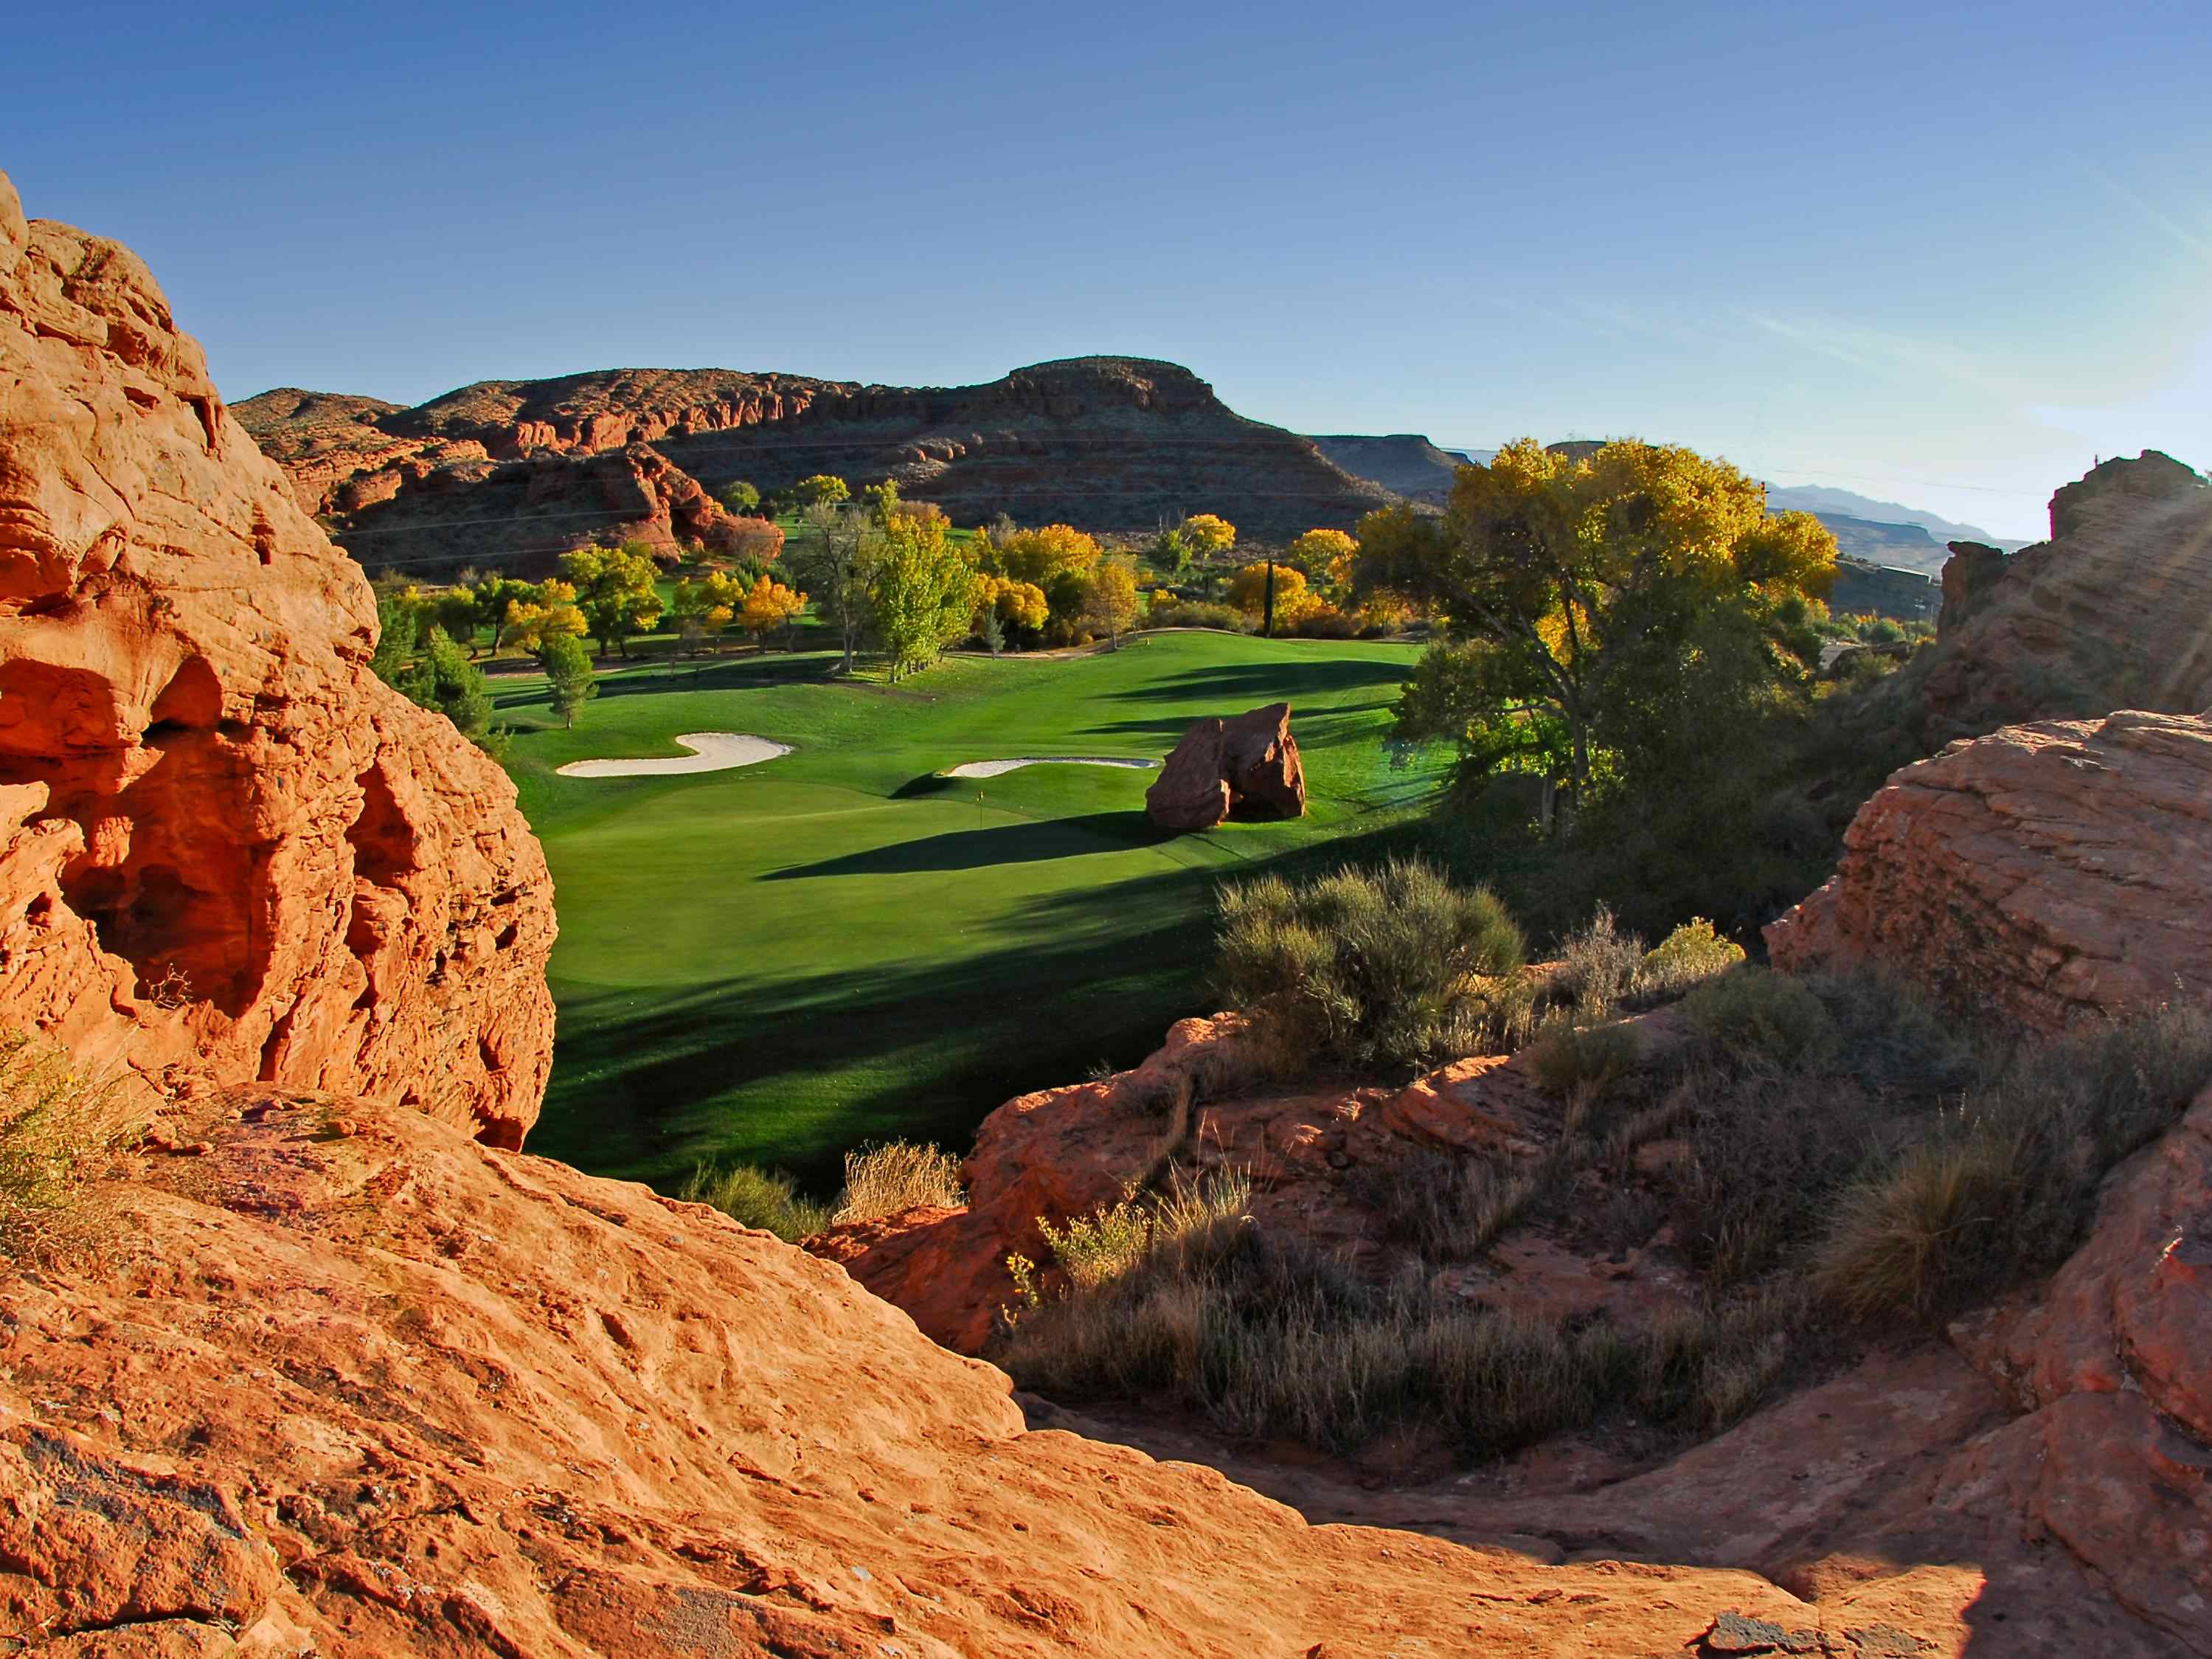 Enjoy golfing in St. George, our hotel offers golf packages!